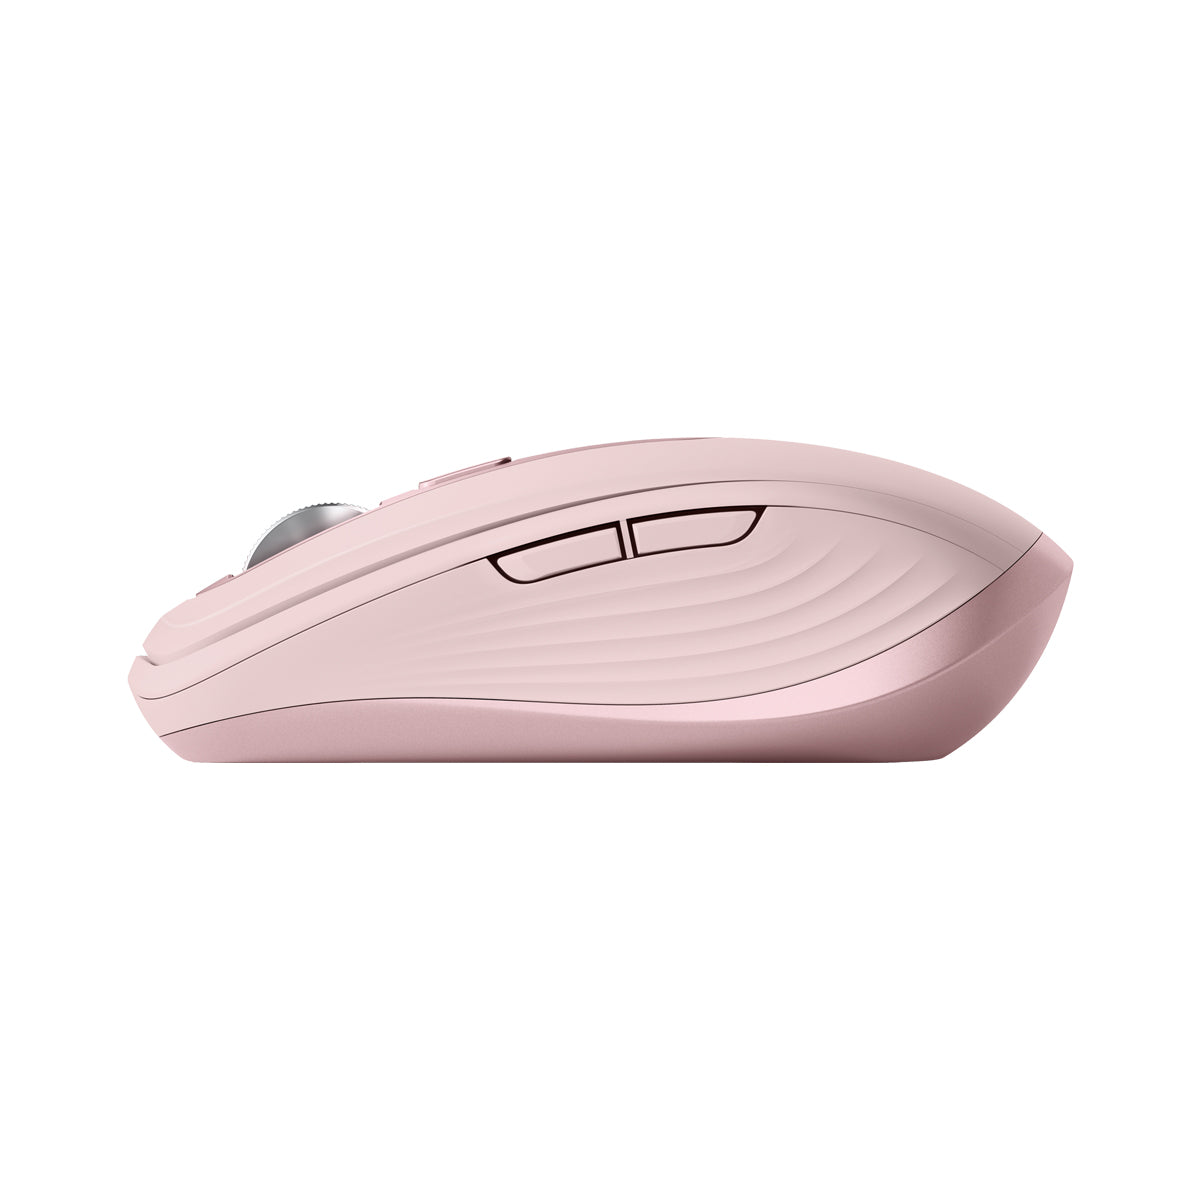 MX Anywhere 3S High Performance Wireless Mouse